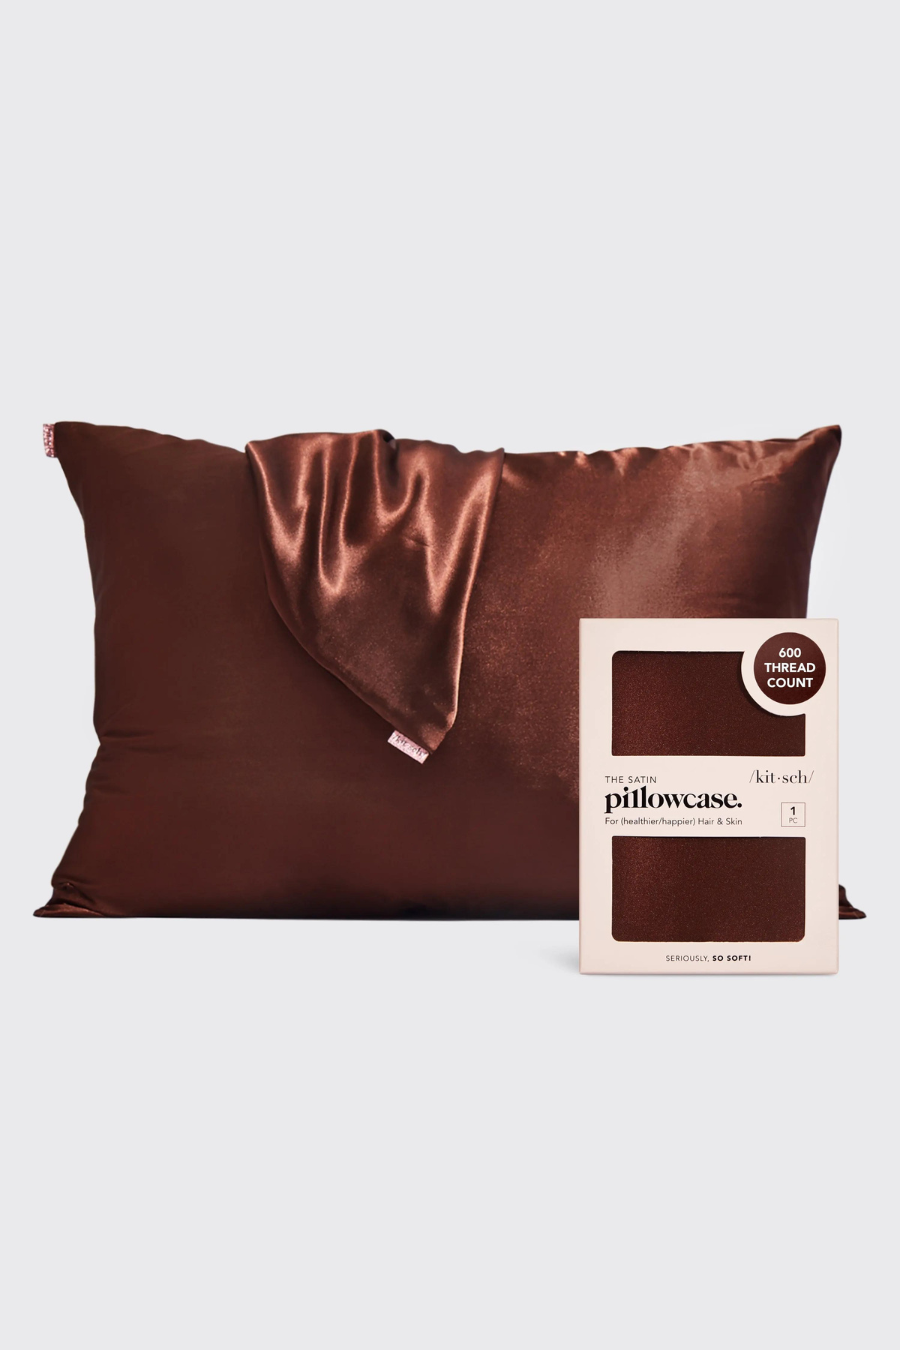 cocoa satin pillow case with a satin pillow case wrapped over it and a case in its box